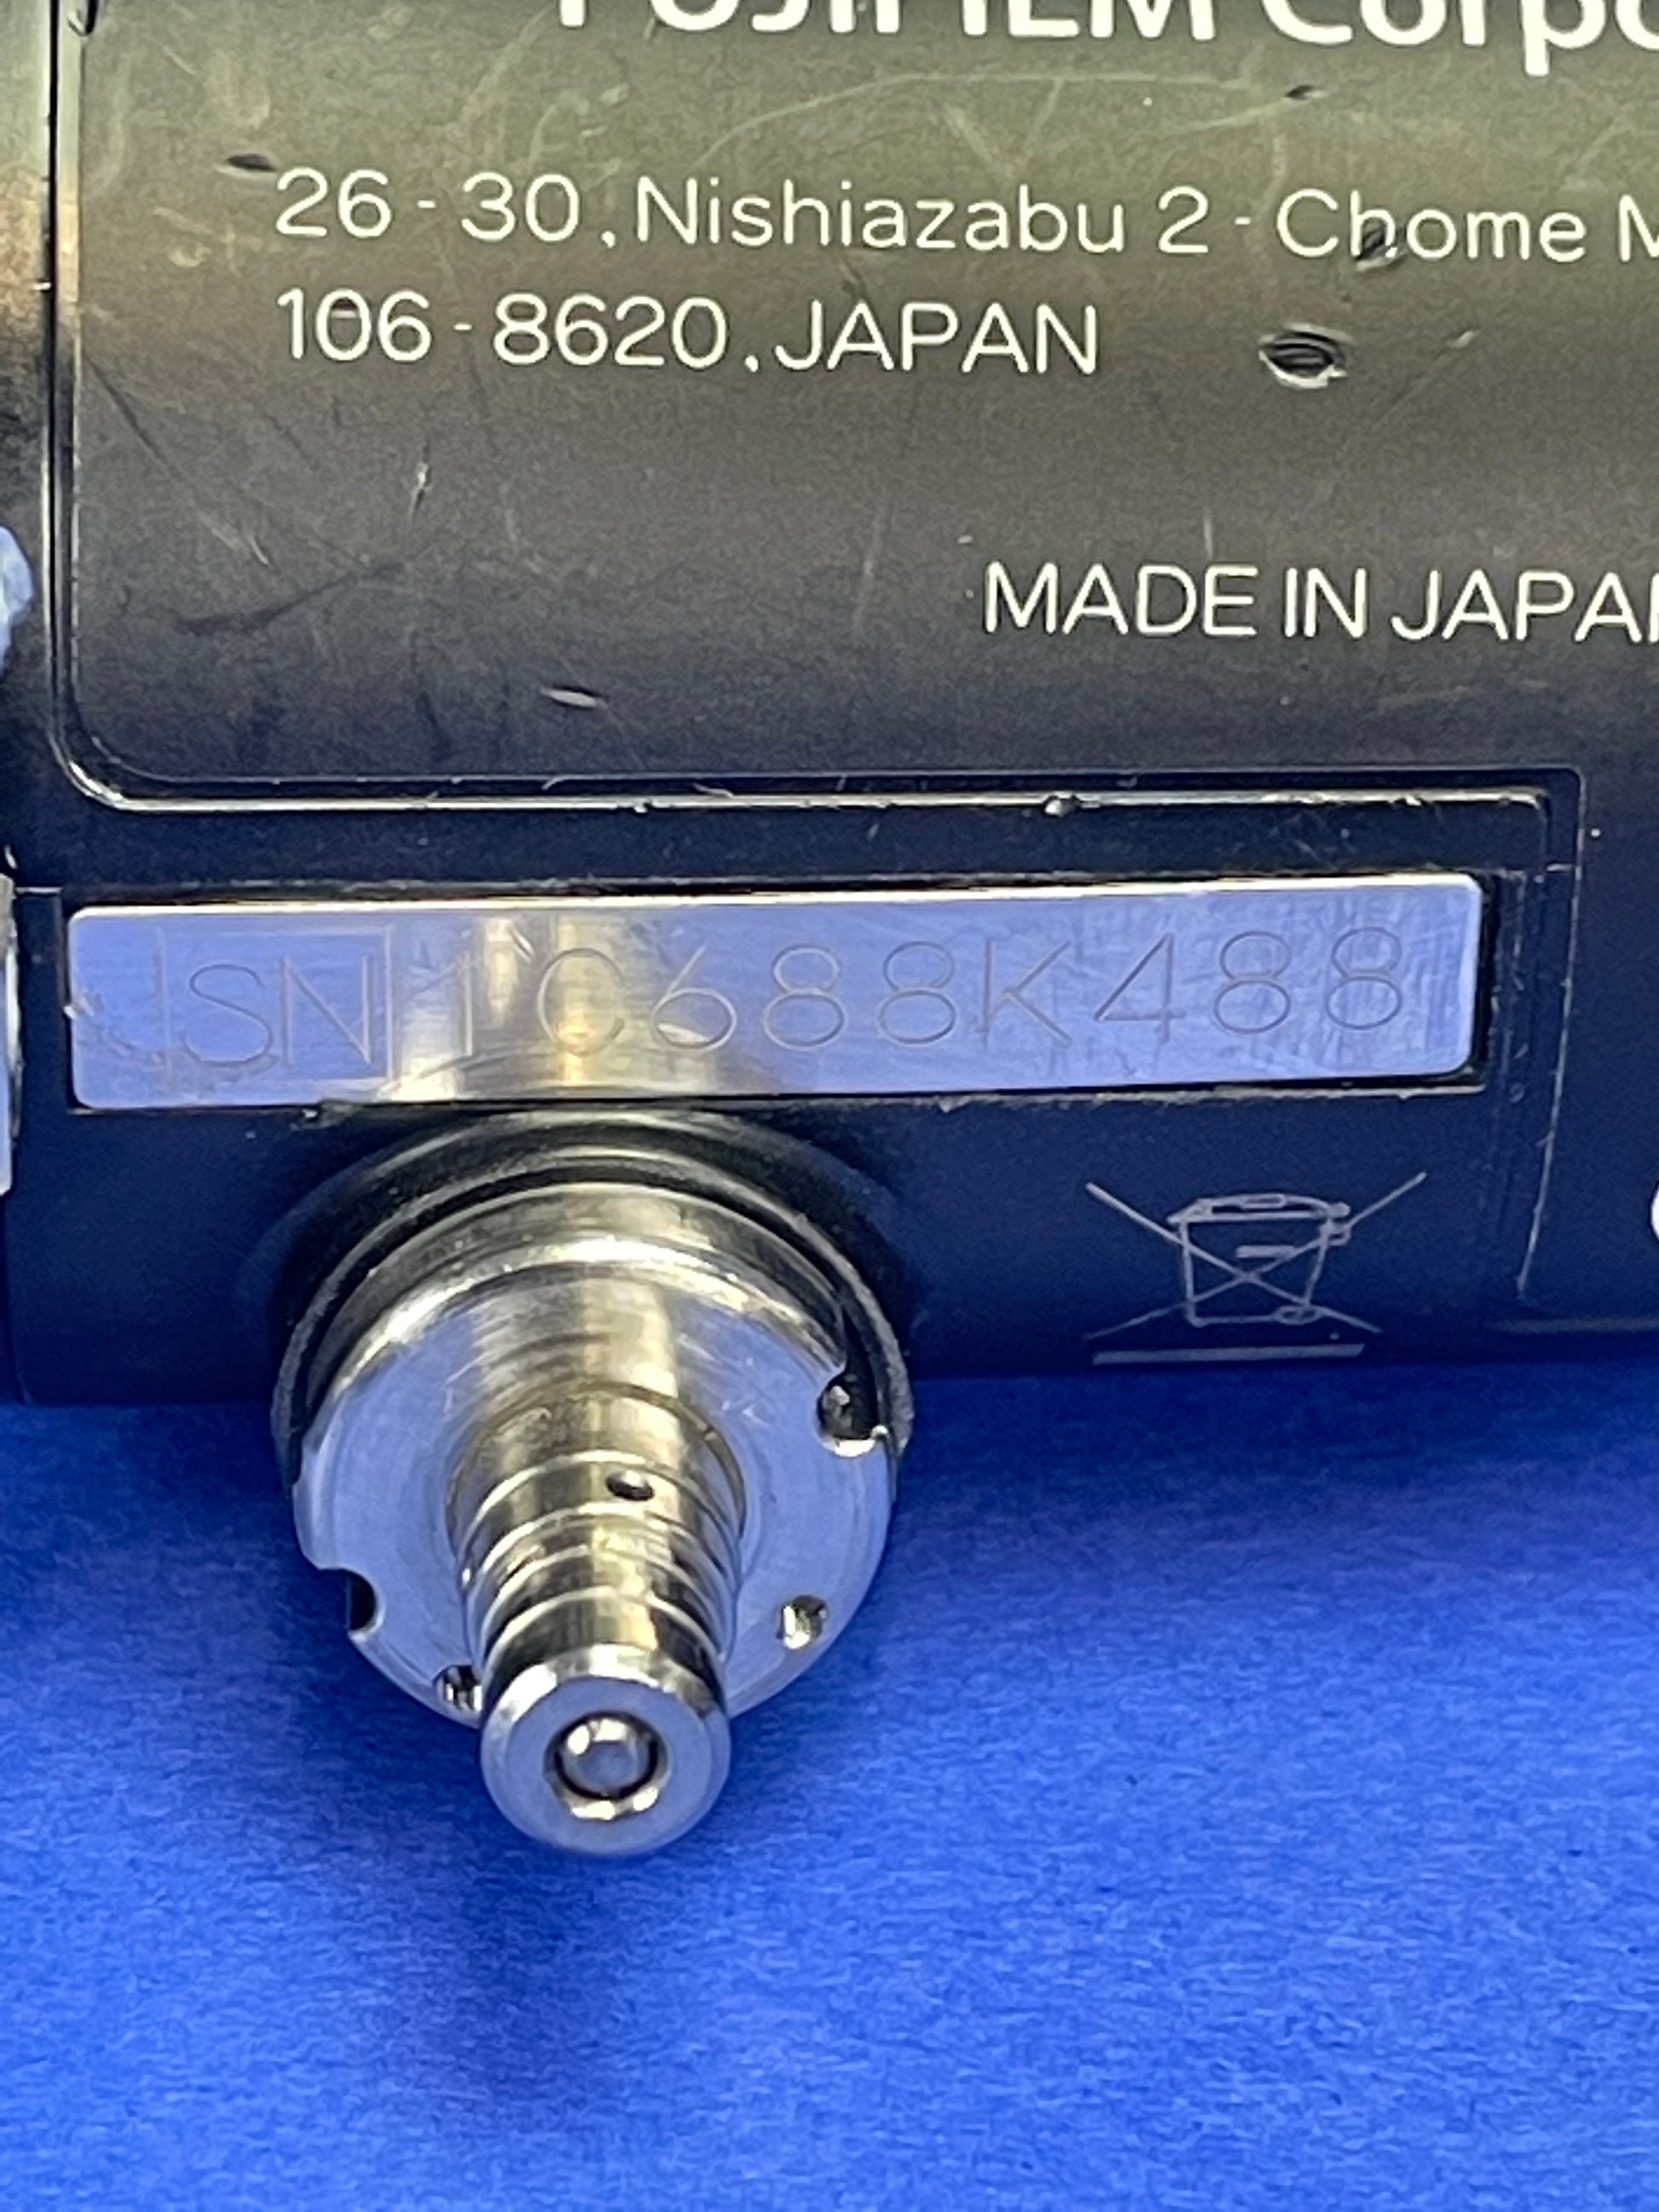 Endoscope made by Japan serial number Leak test endoscope 